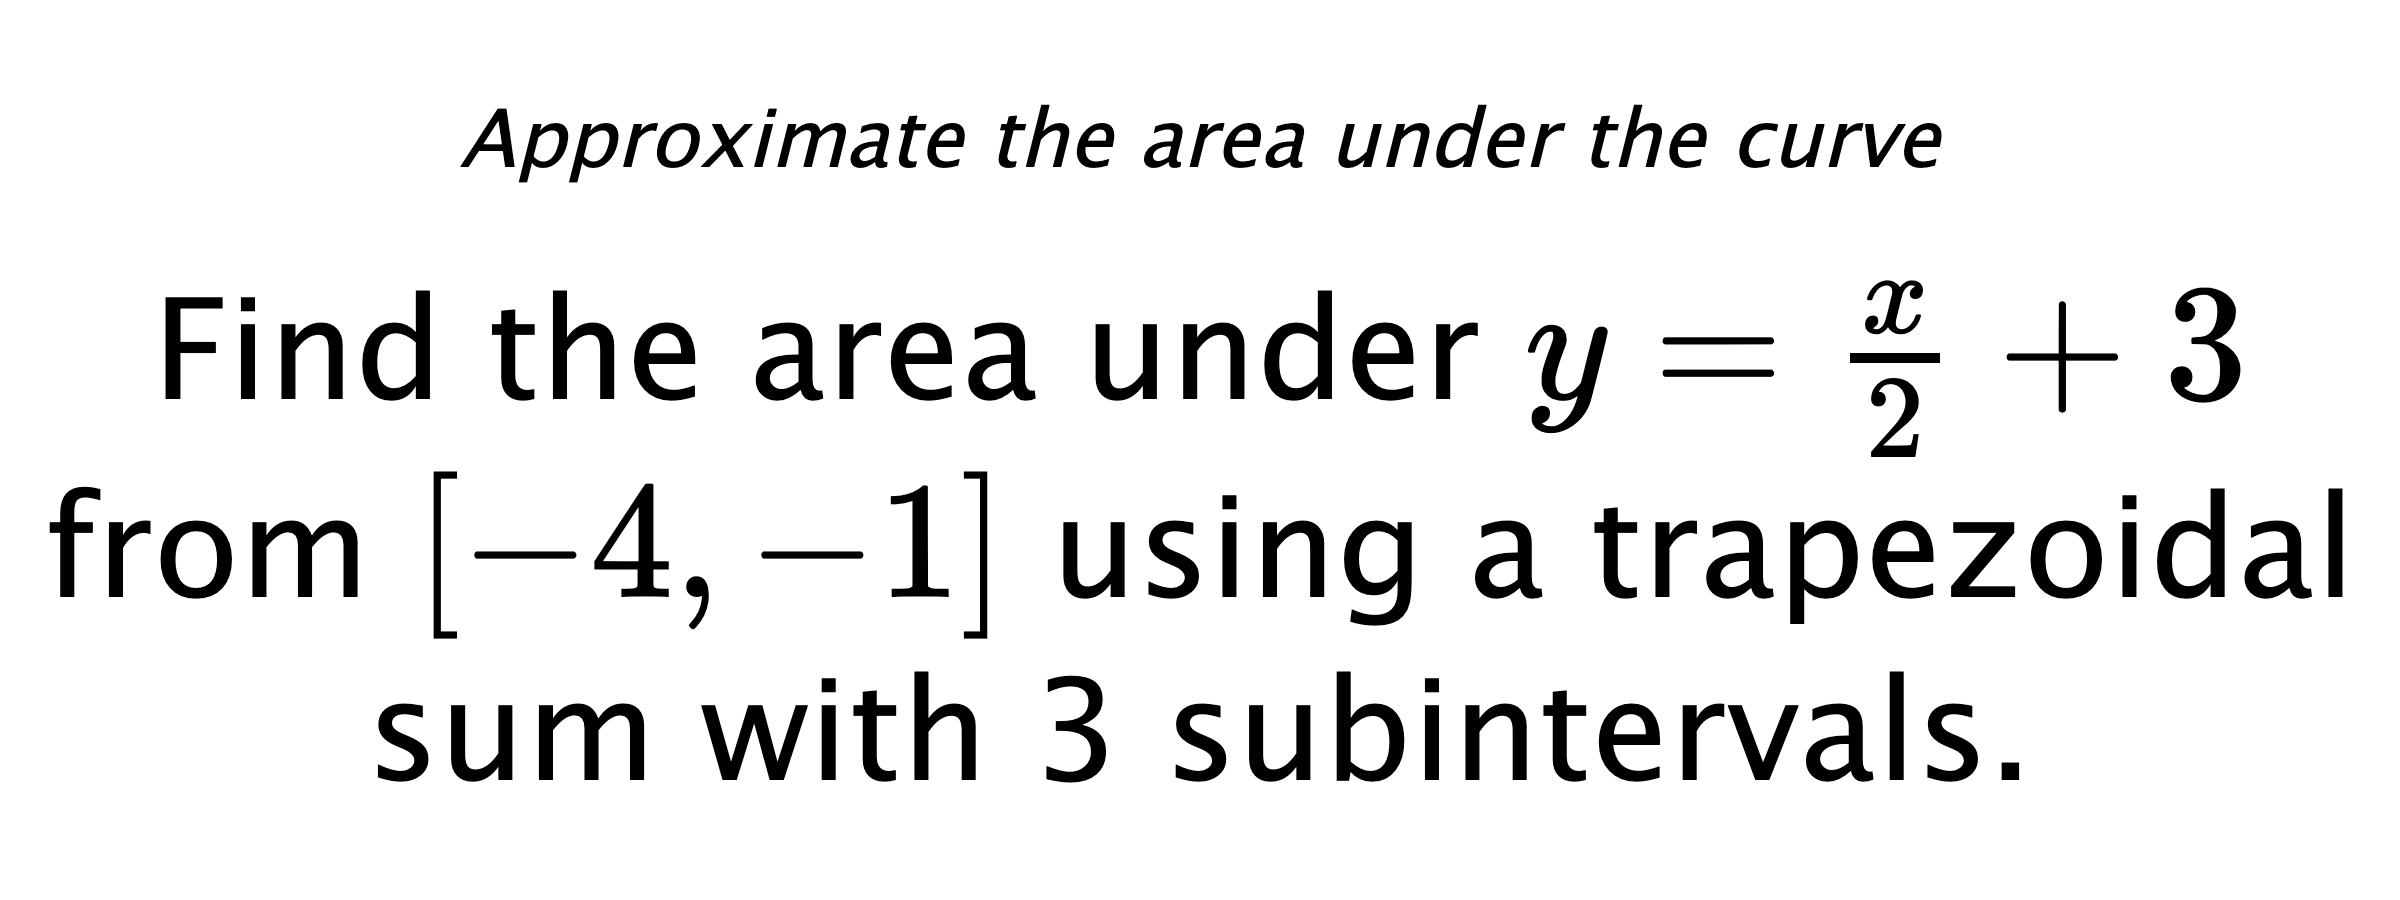 Approximate the area under the curve Find the area under $ y=\frac{x}{2}+3 $ from $ [-4,-1] $ using a trapezoidal sum with 3 subintervals.